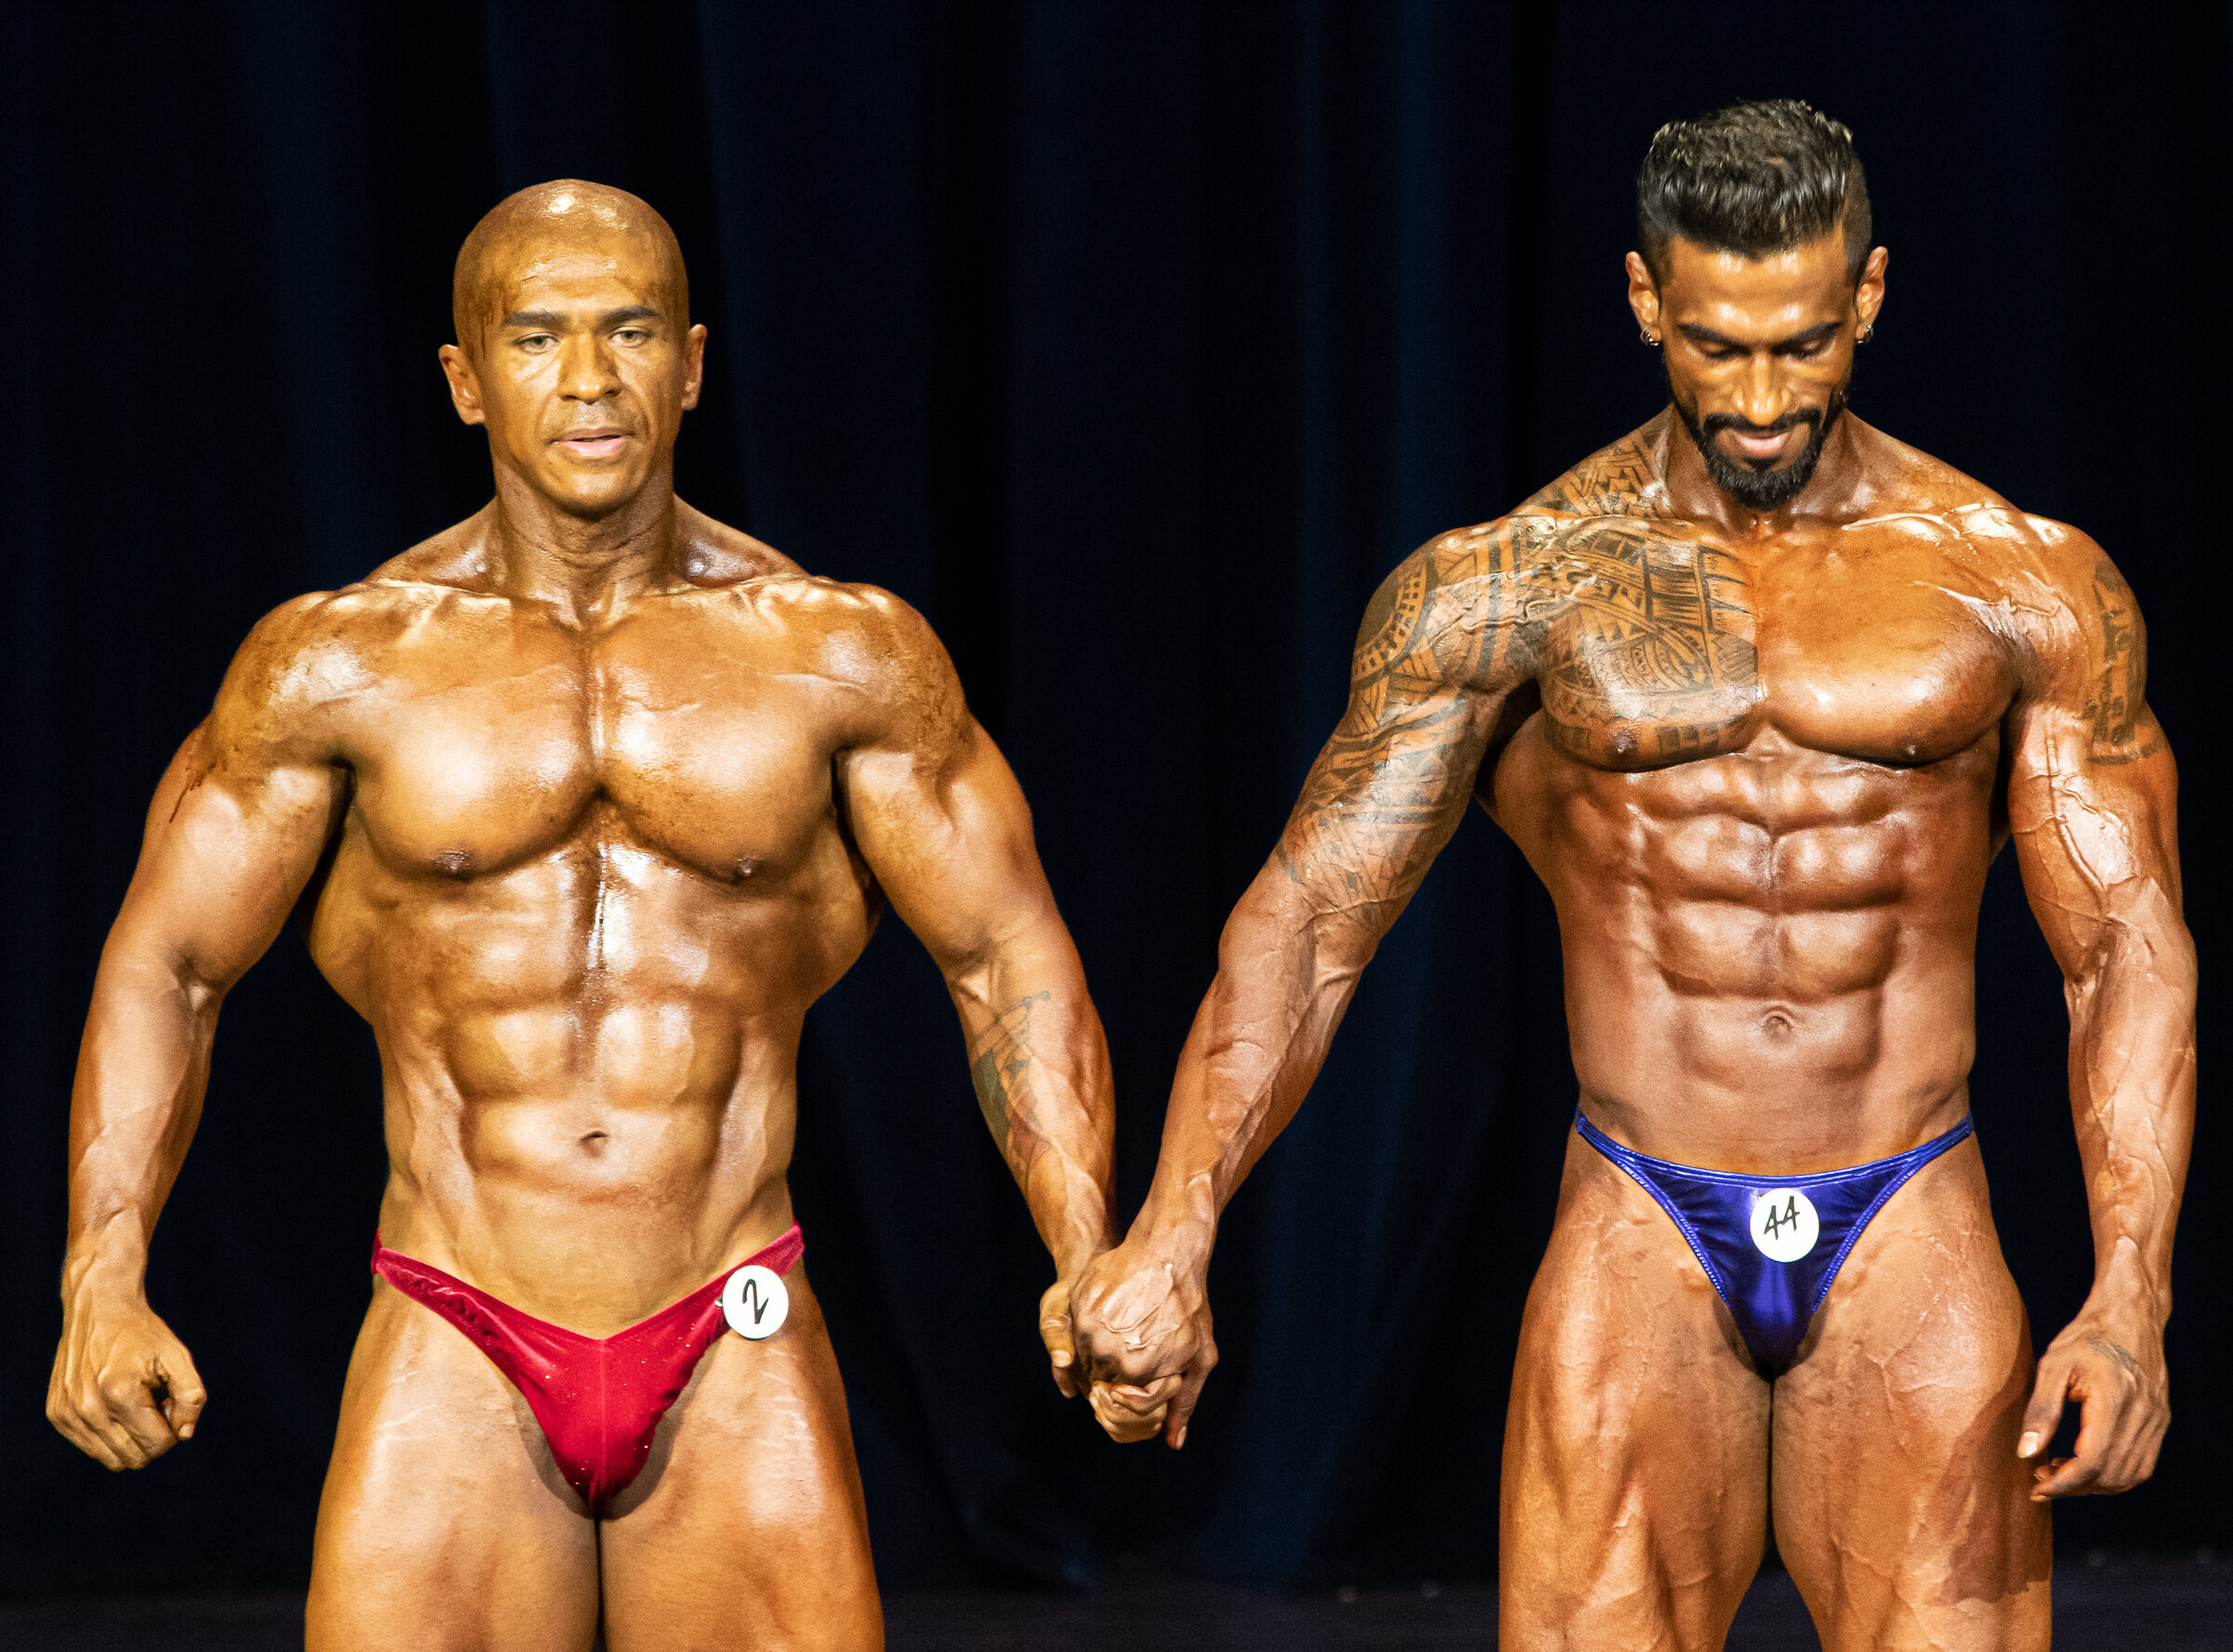 A Panamanian and Malaysian competitor holds hands during the IFBB Regional Bodybuilding Finals at the Kreta Ayer People's Theatre.